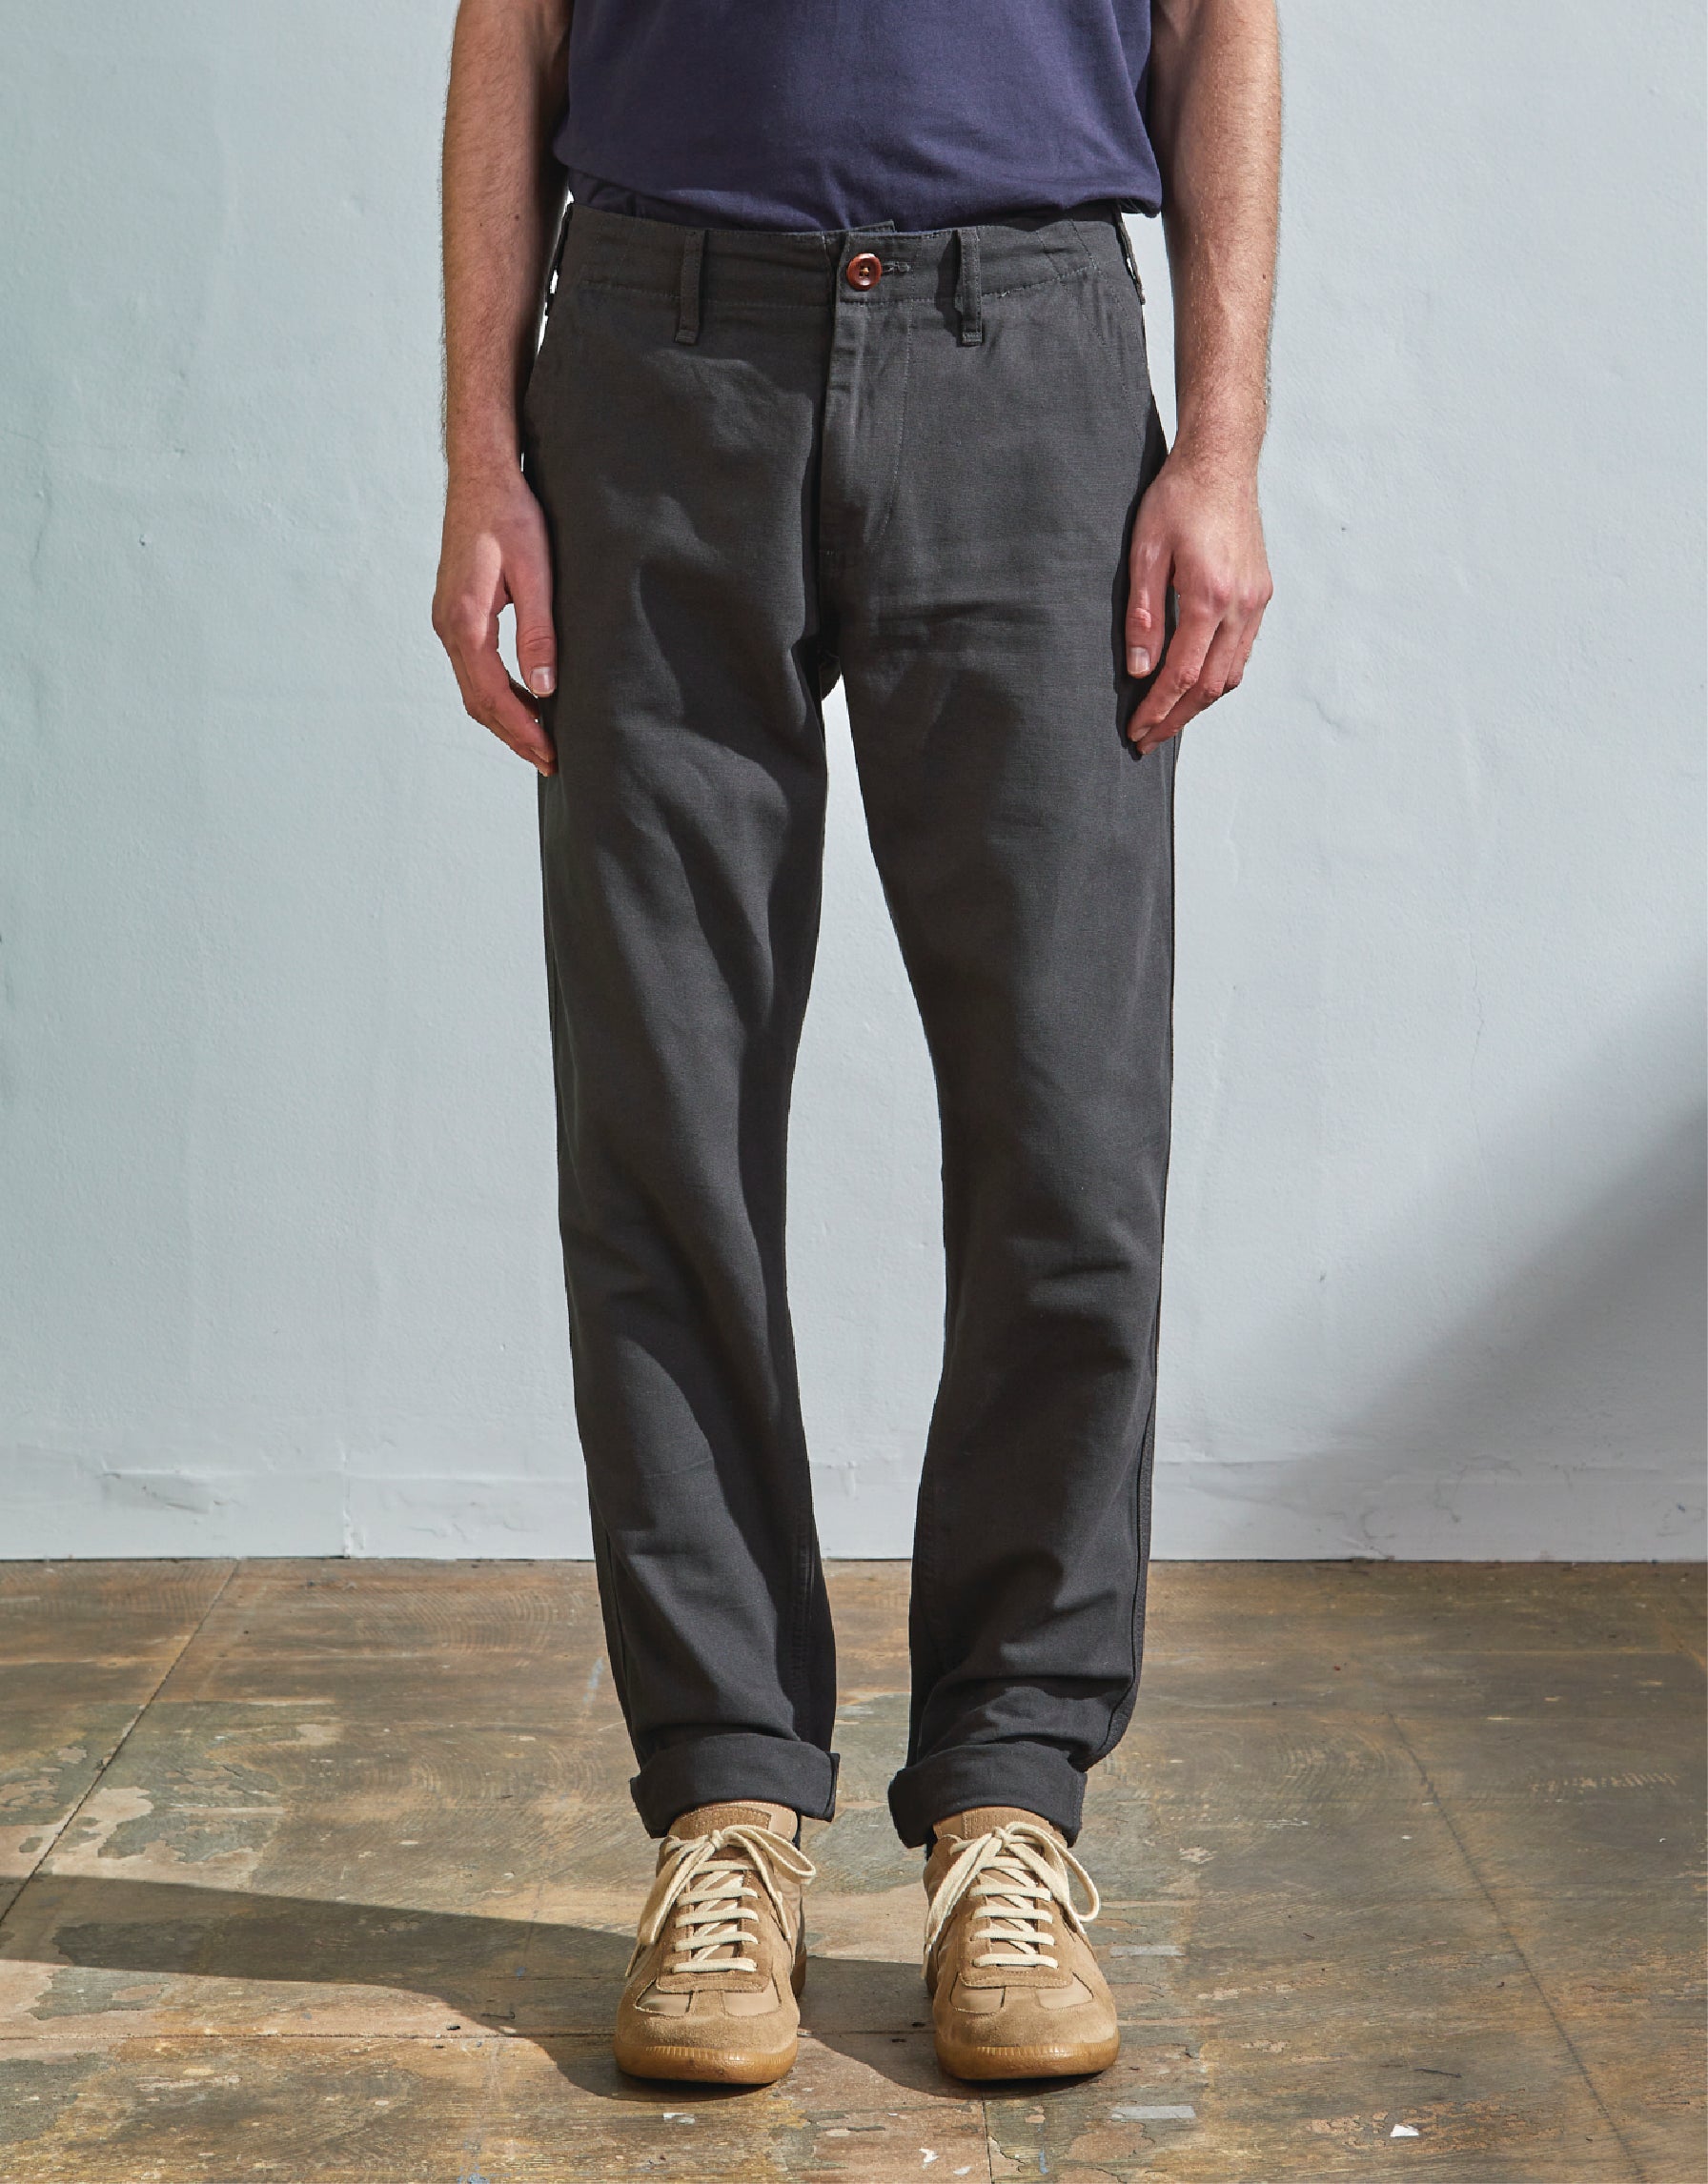 Uskees | Trouser Fit Guide